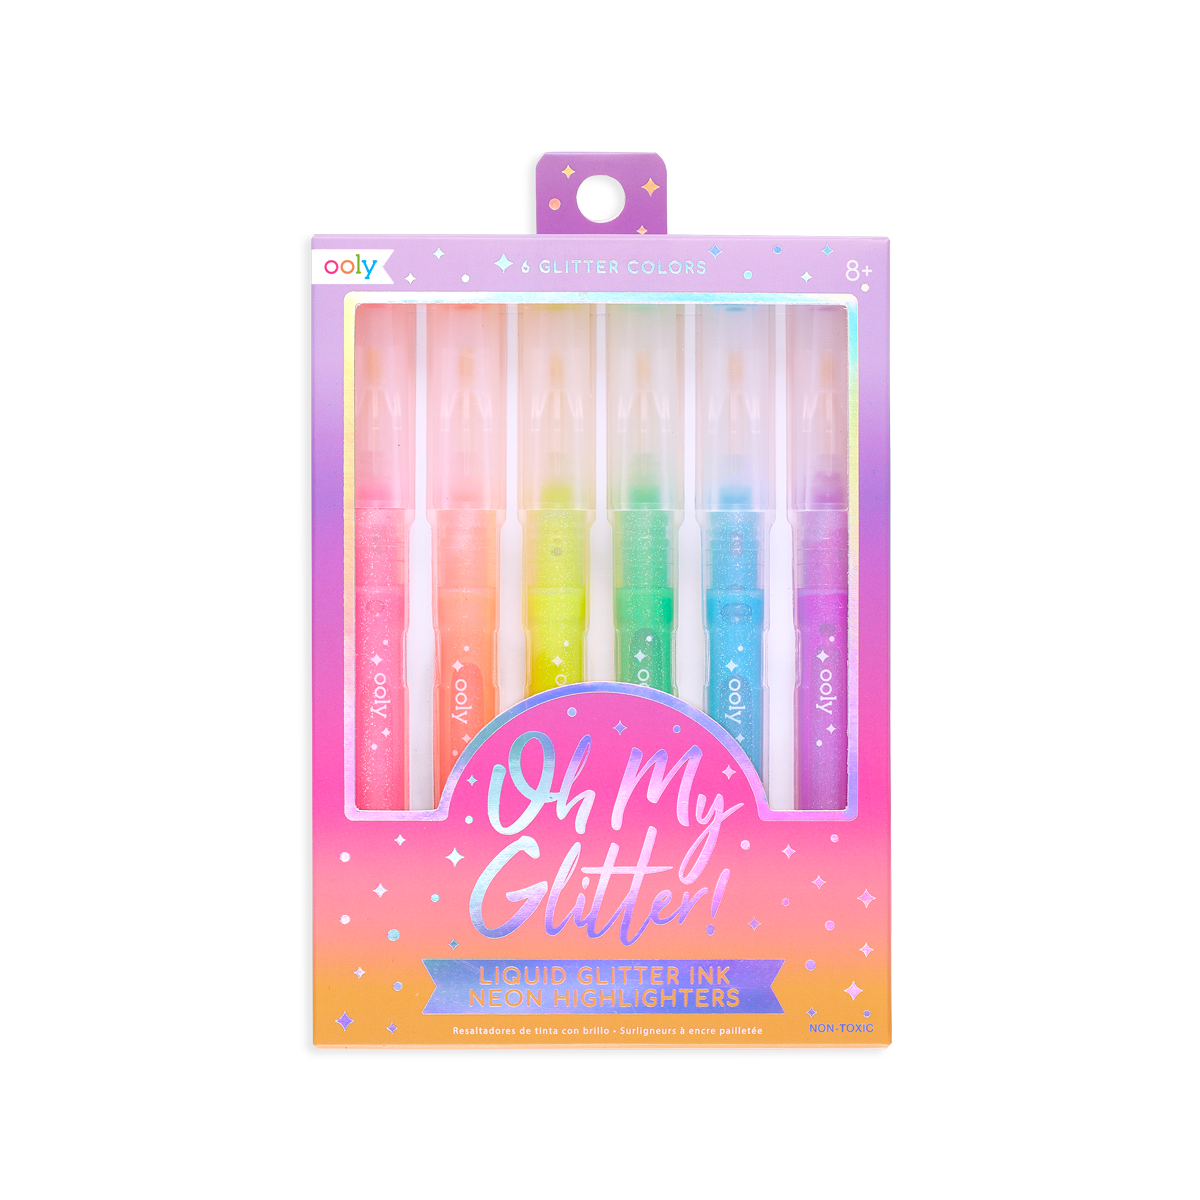 OOLY Oh My Glitter! Neon Highlighters set of 6